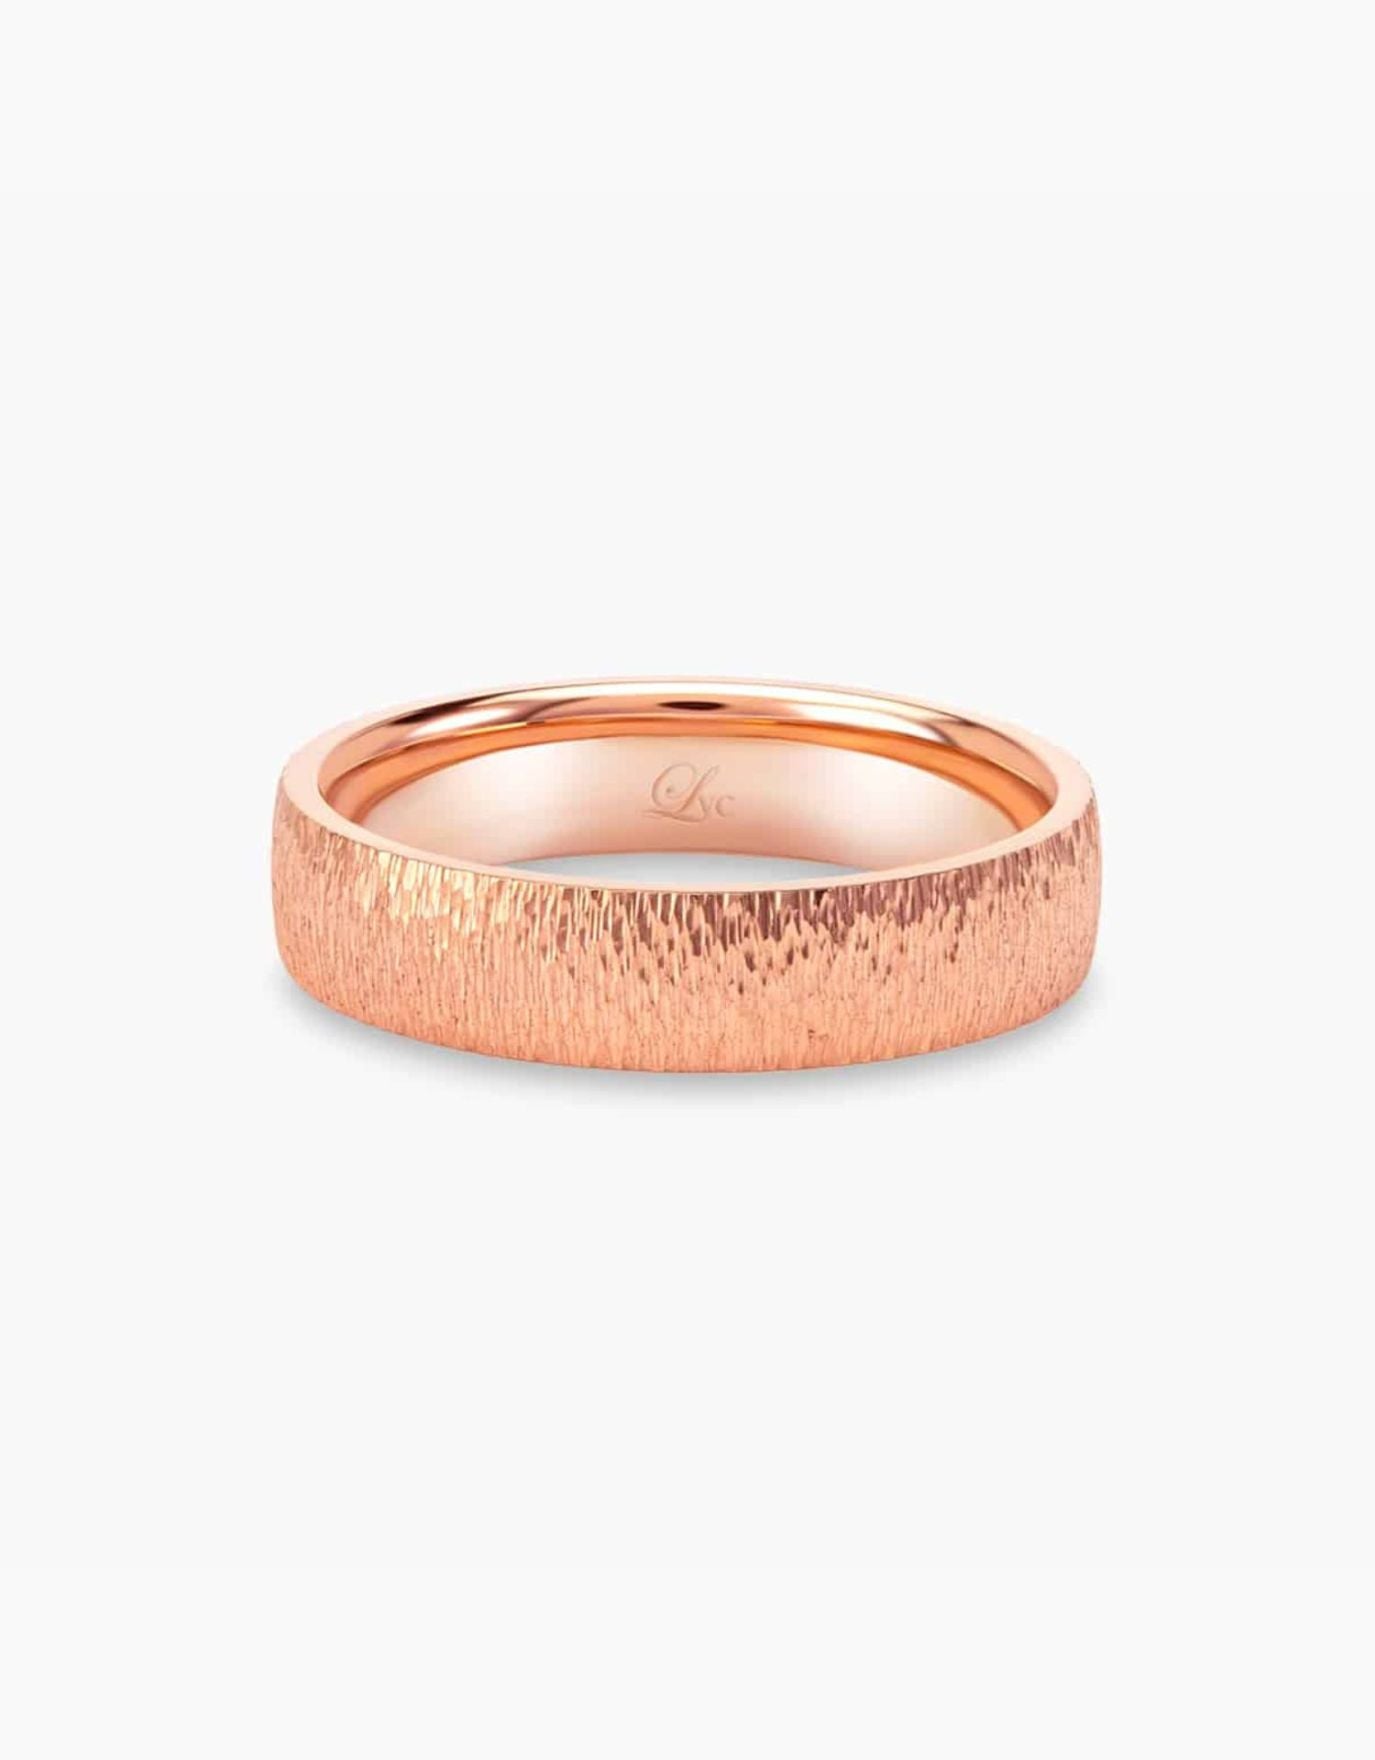 LVC Soleil Wedding Band in Rose Gold with a Hammered Finish